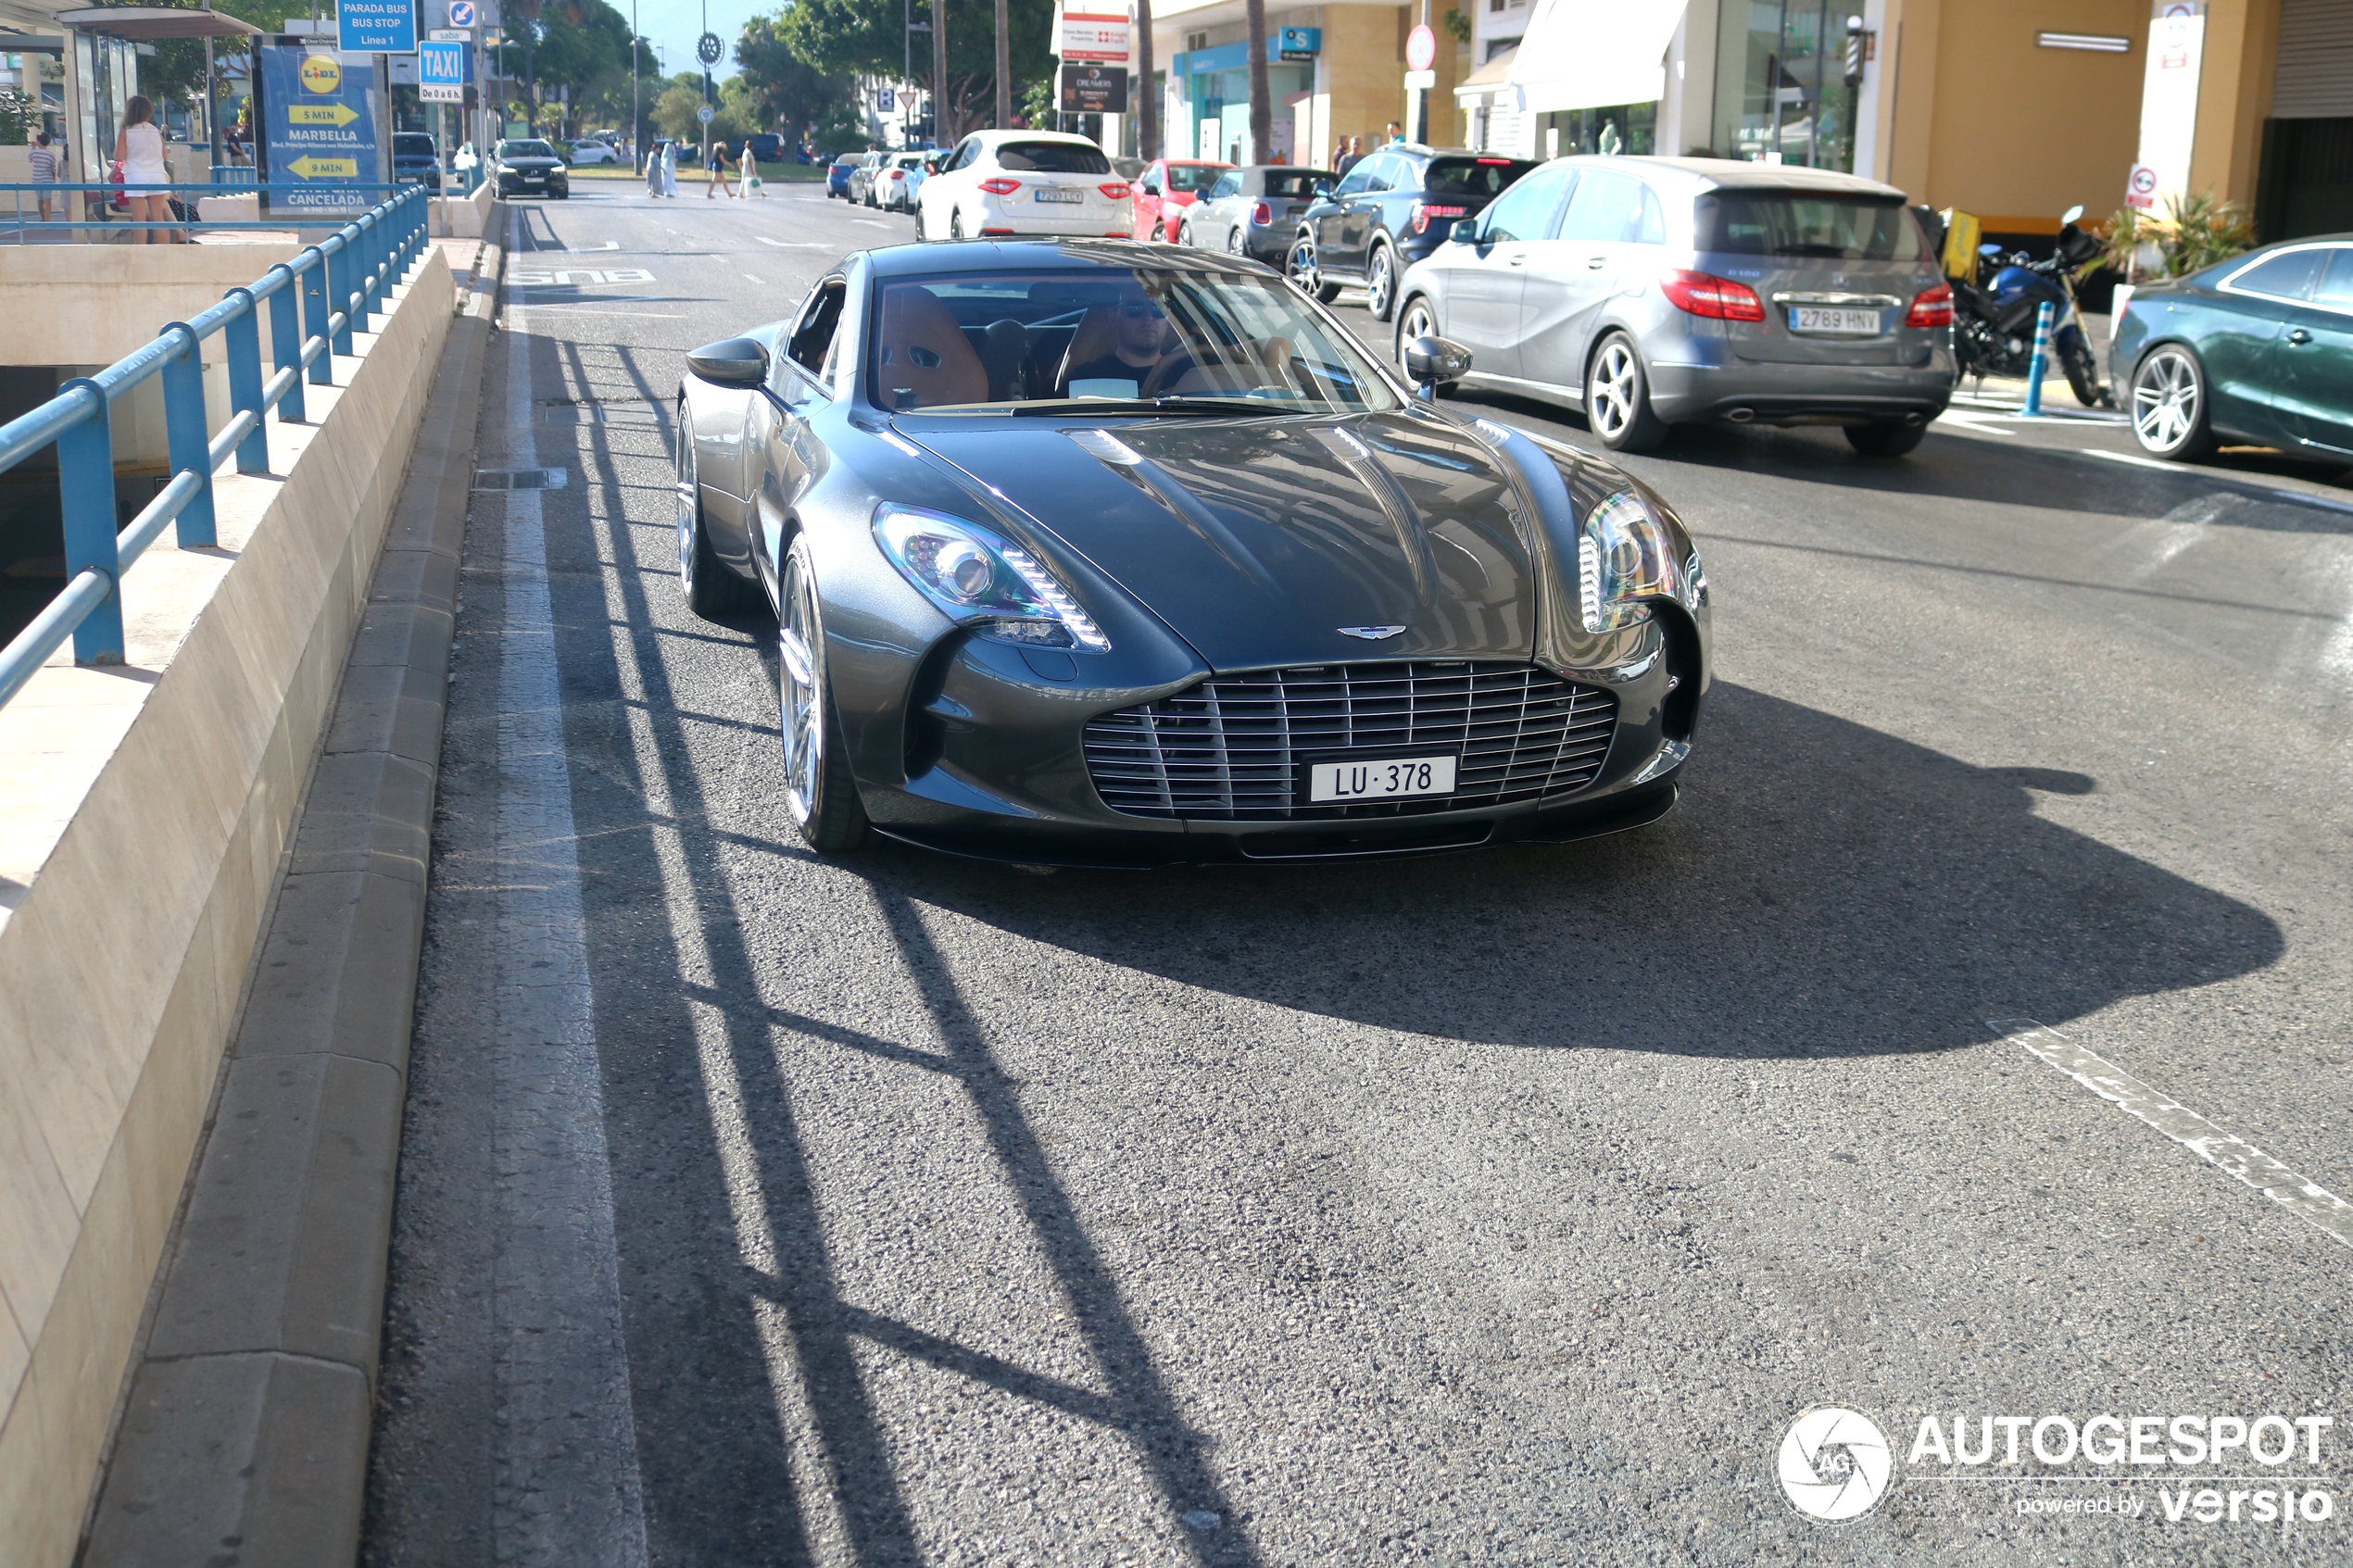 Another rarity appears in Marbella